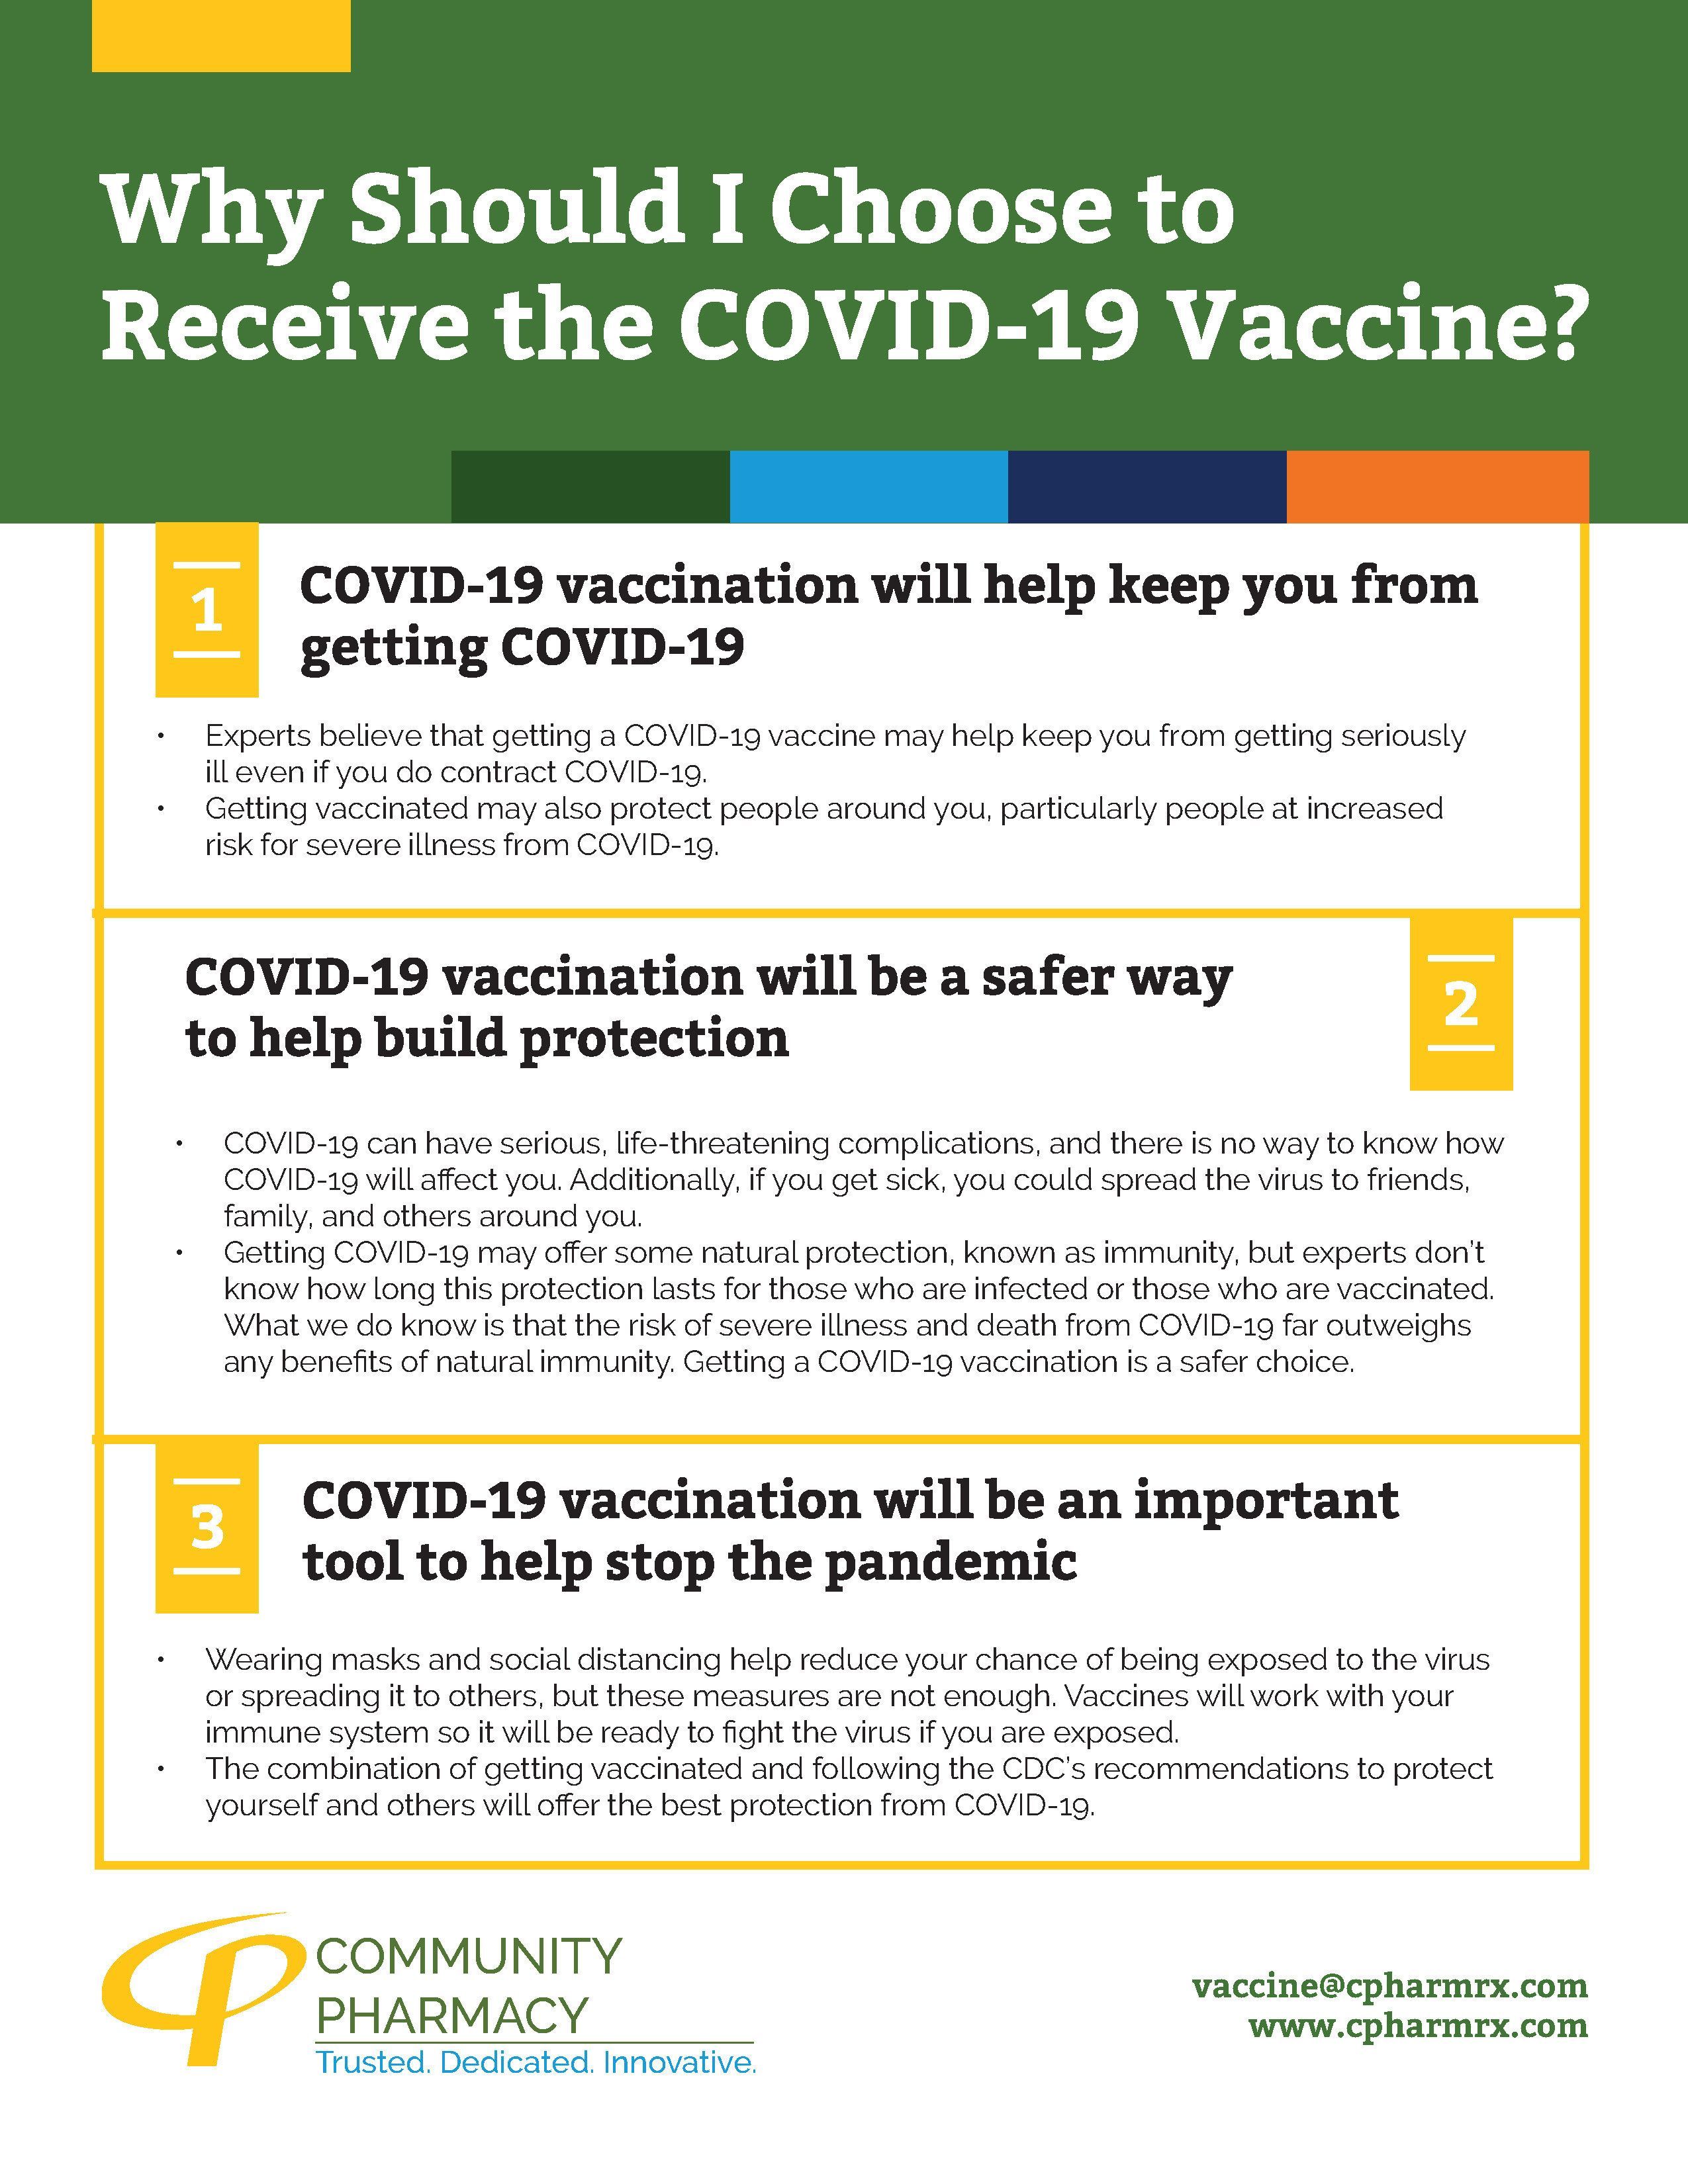 Why Should I Receive COVID-19 Vaccine